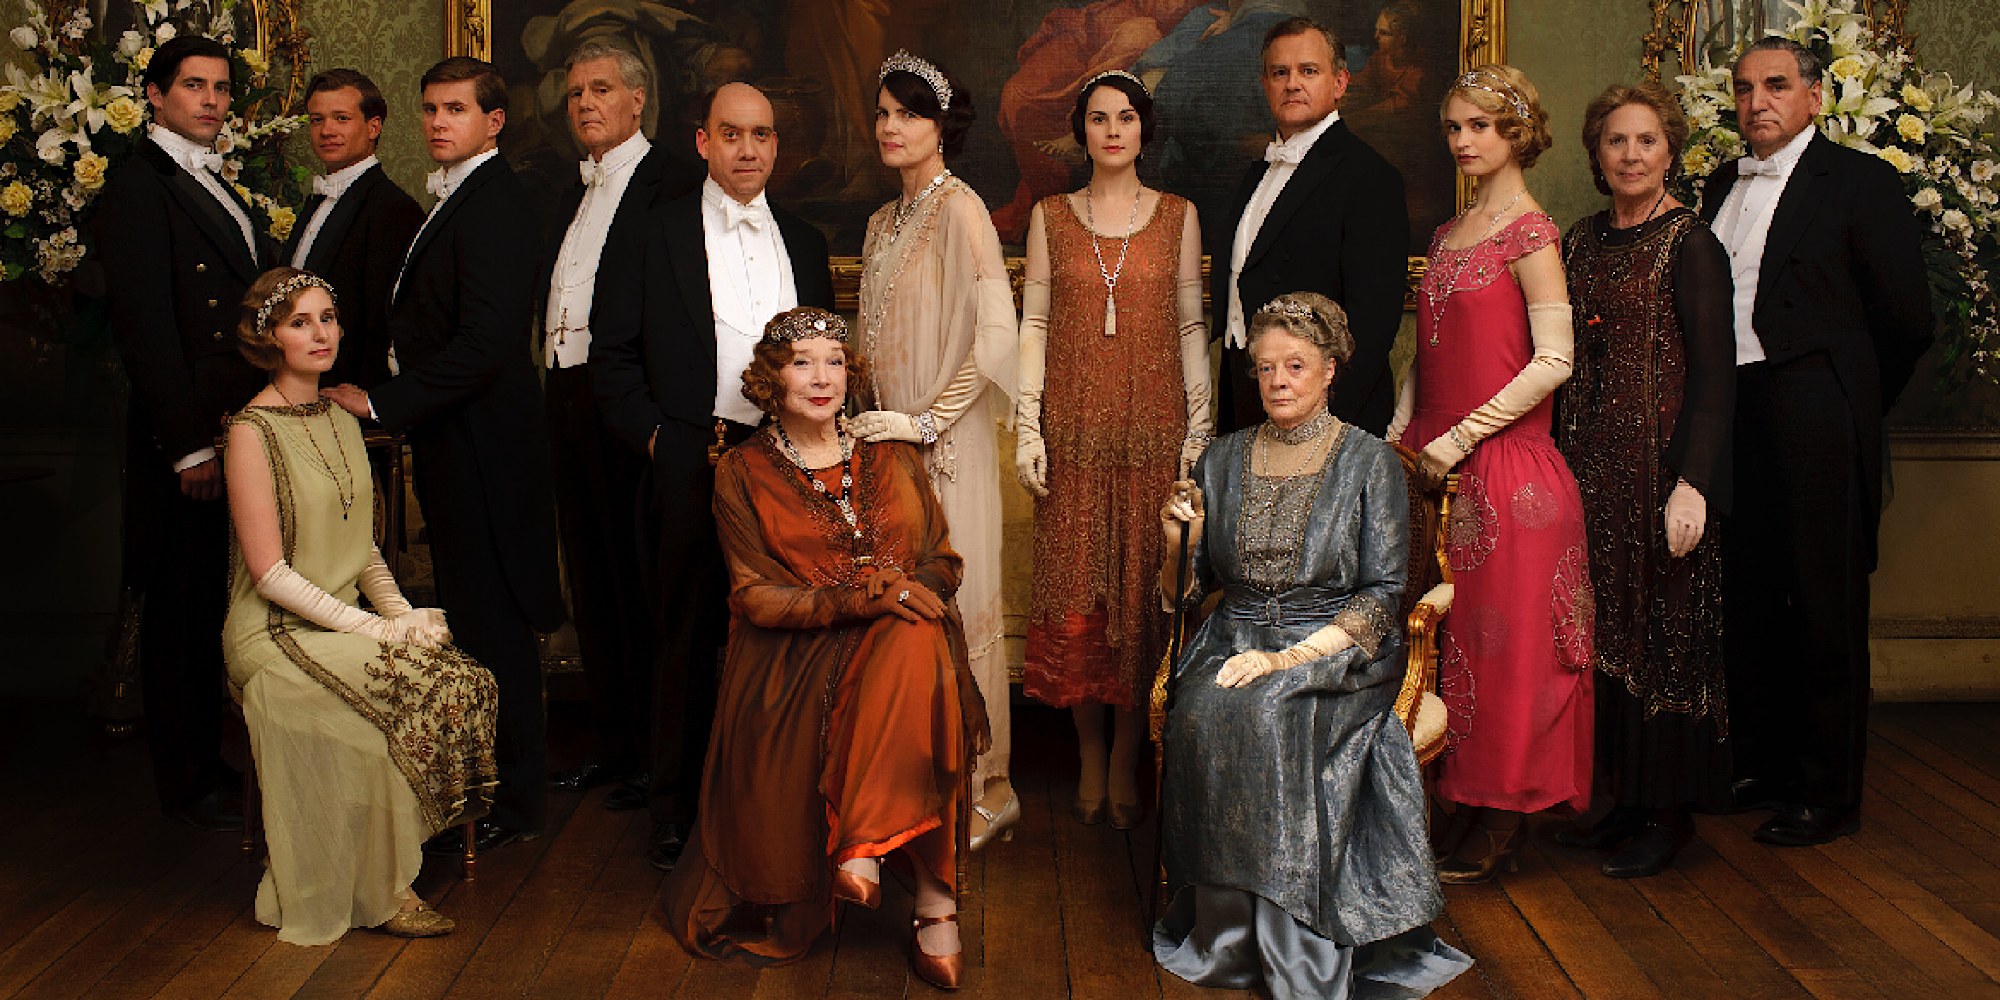 The Crawley family from Downton Abbey.